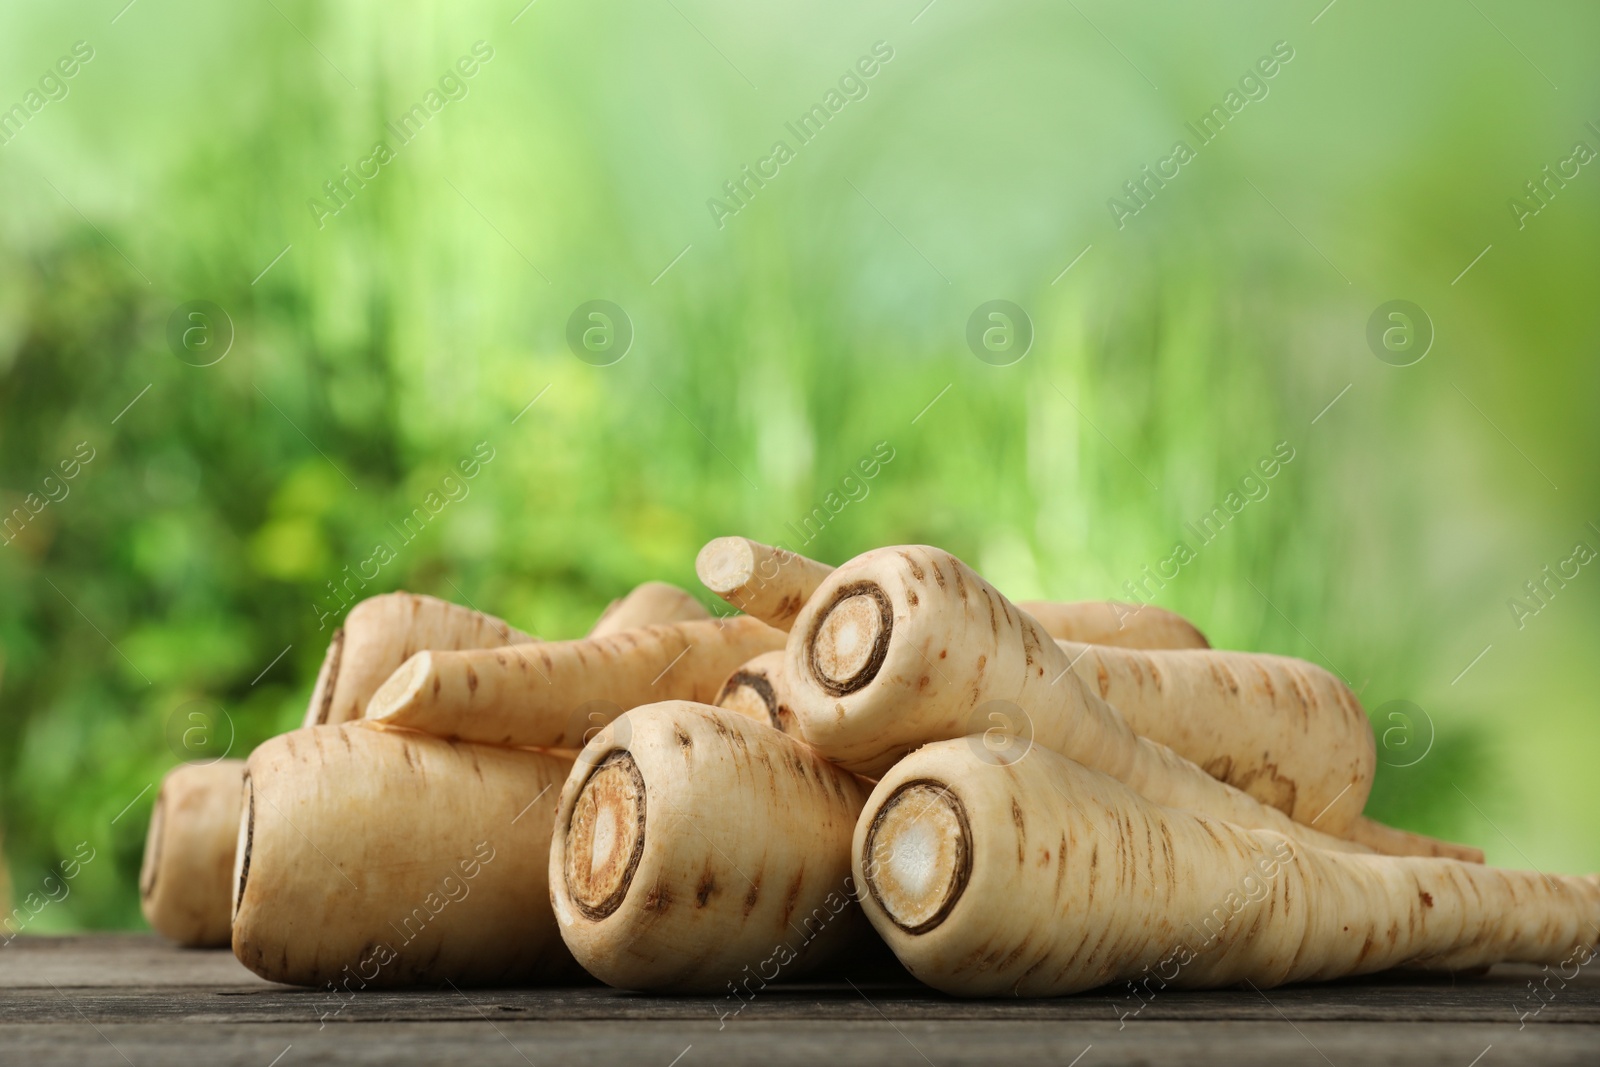 Photo of Delicious fresh ripe parsnips on wooden table outdoors